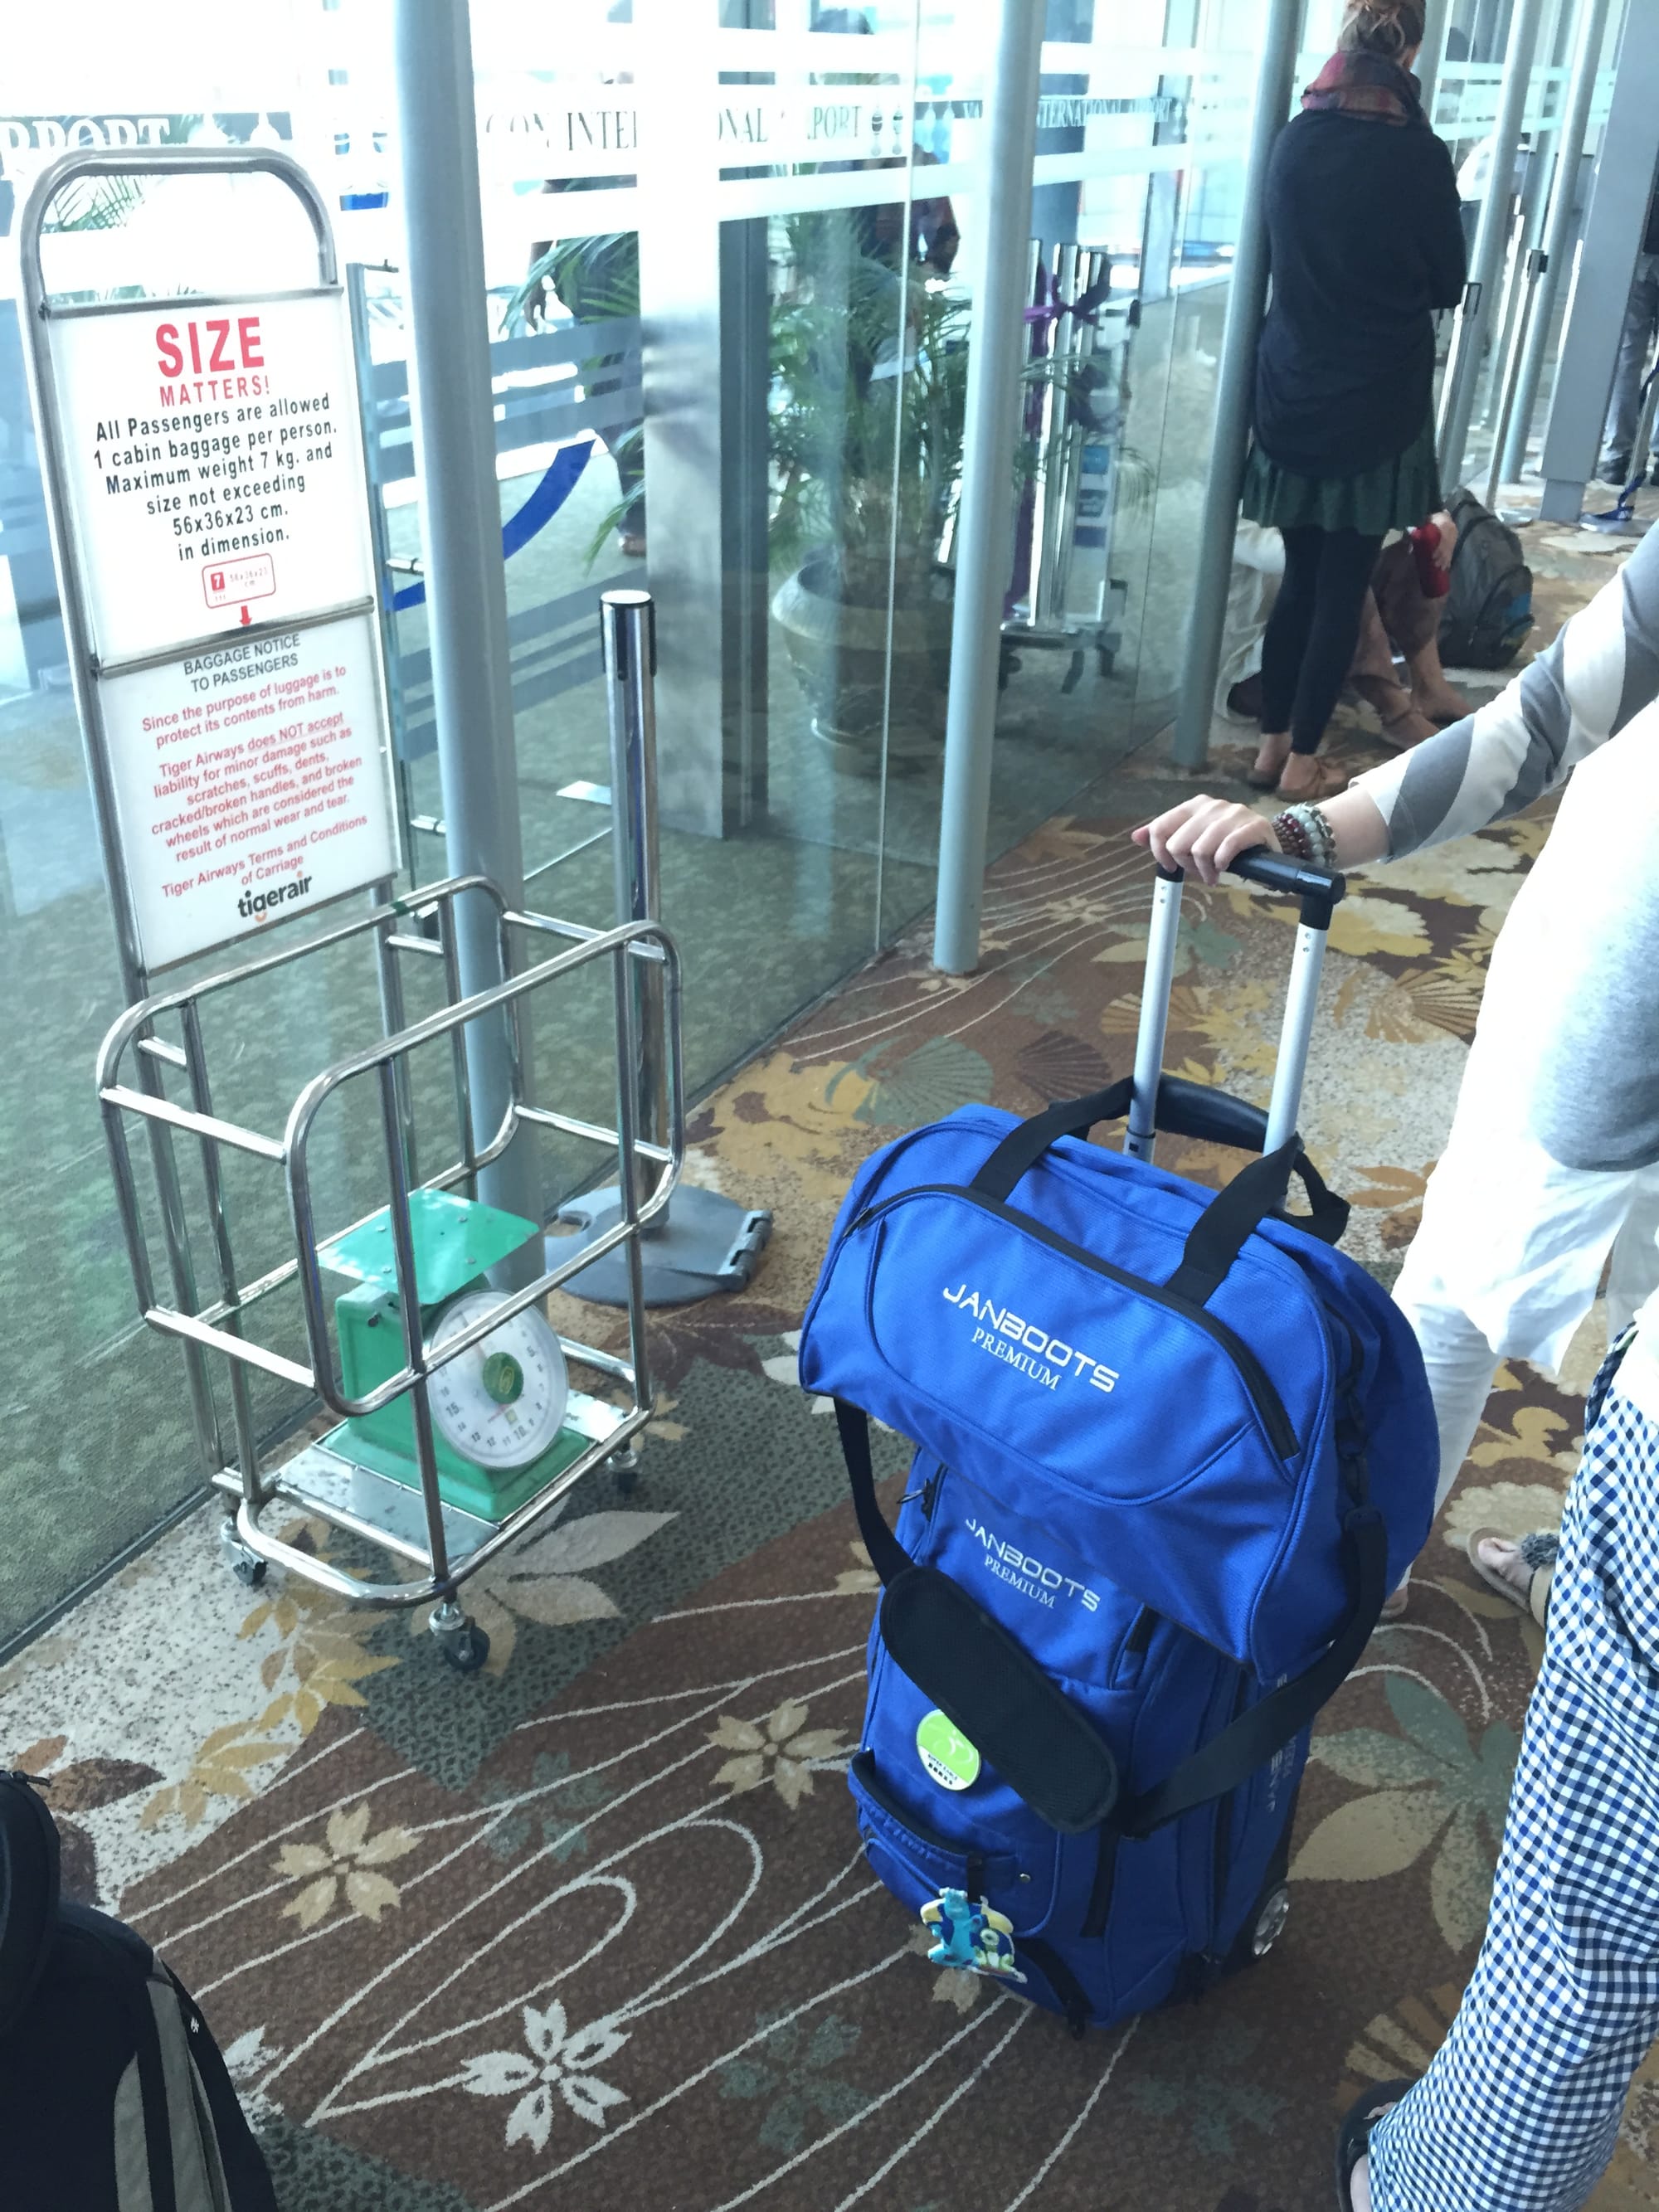 Photo by Author — yes, that carry-on complies with the size and weight restrictions